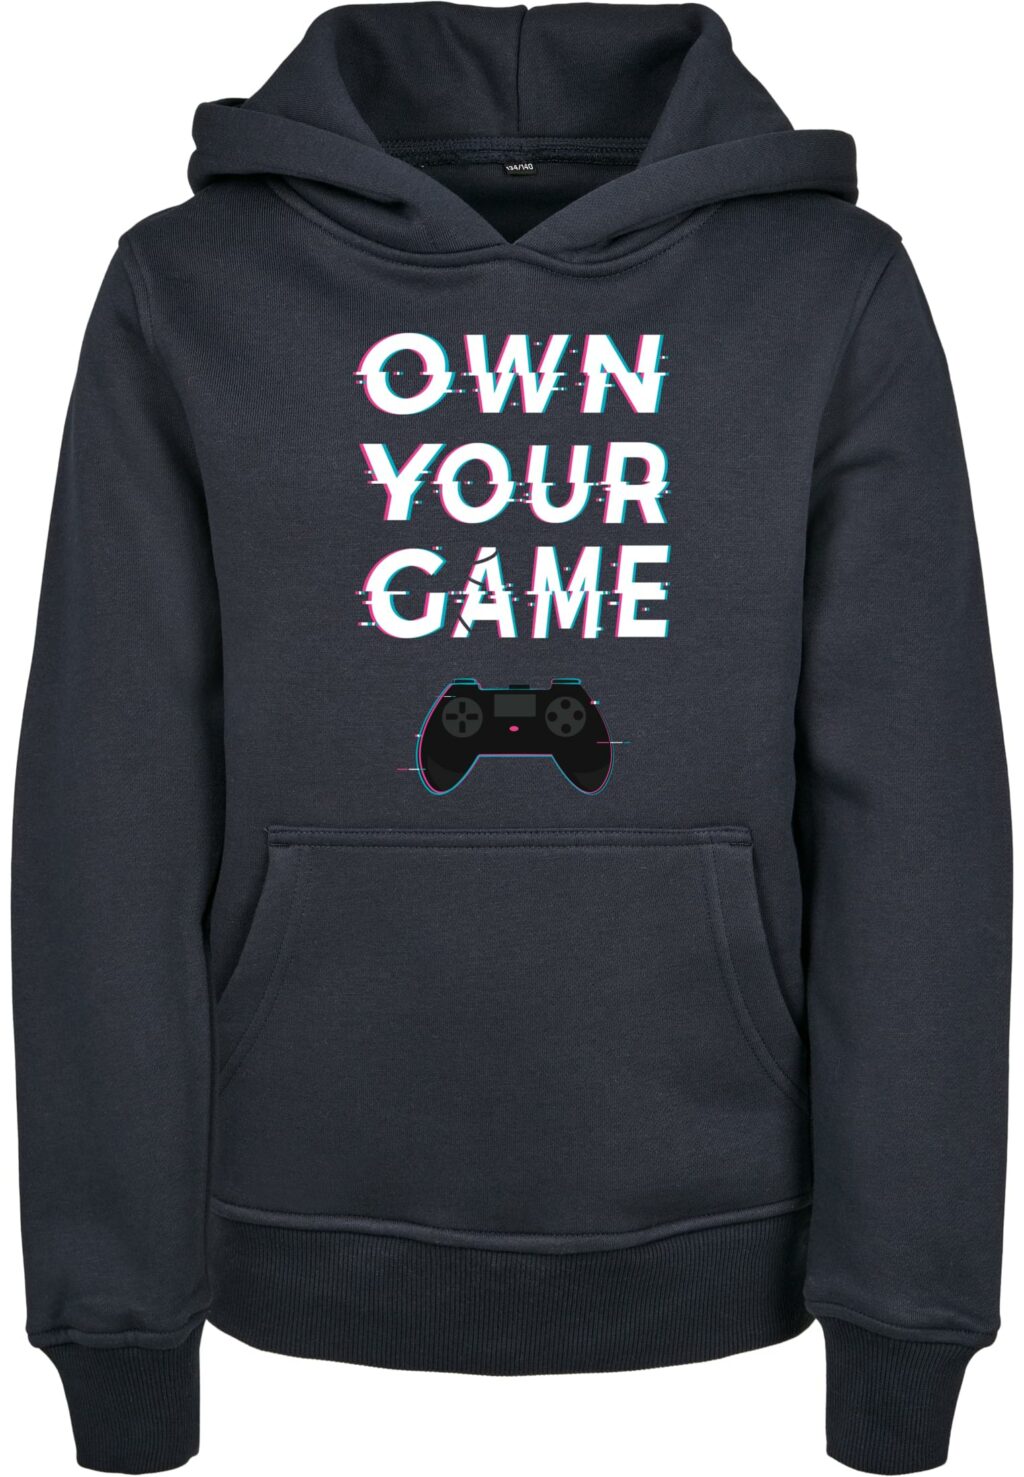 Kids Own Your Game Hoody navy MTK199